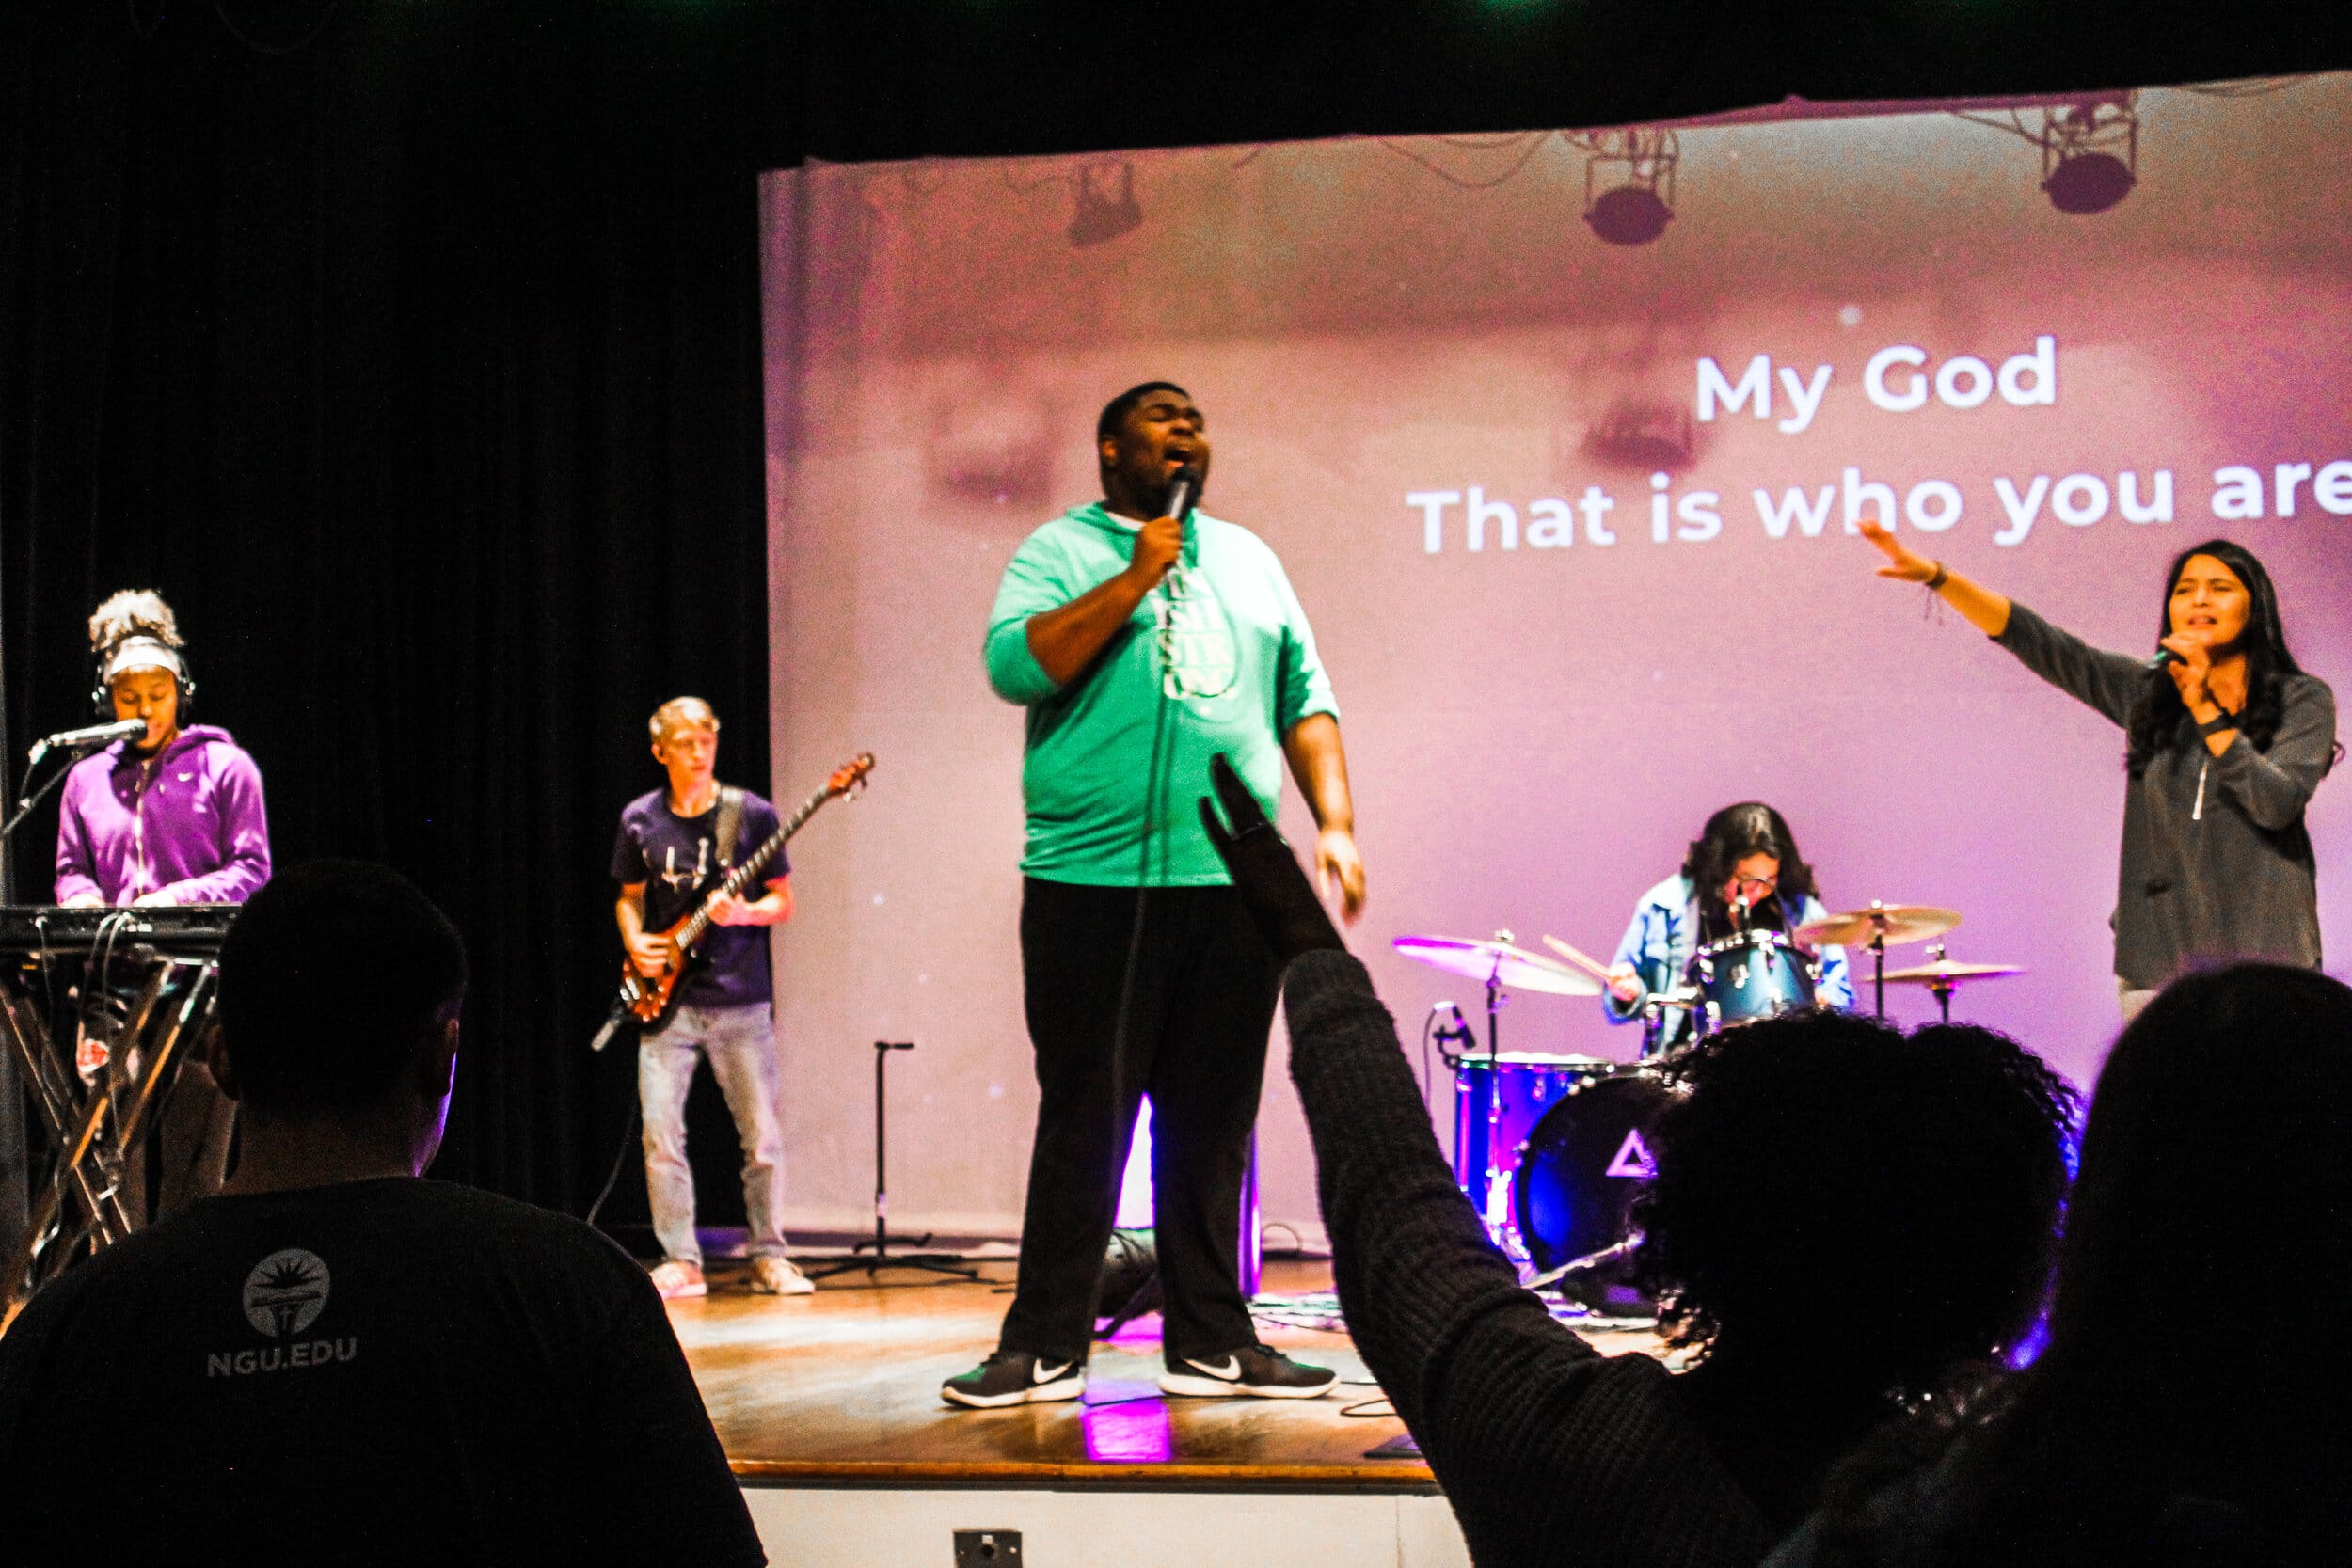 Way Maker being performed by the worship team.